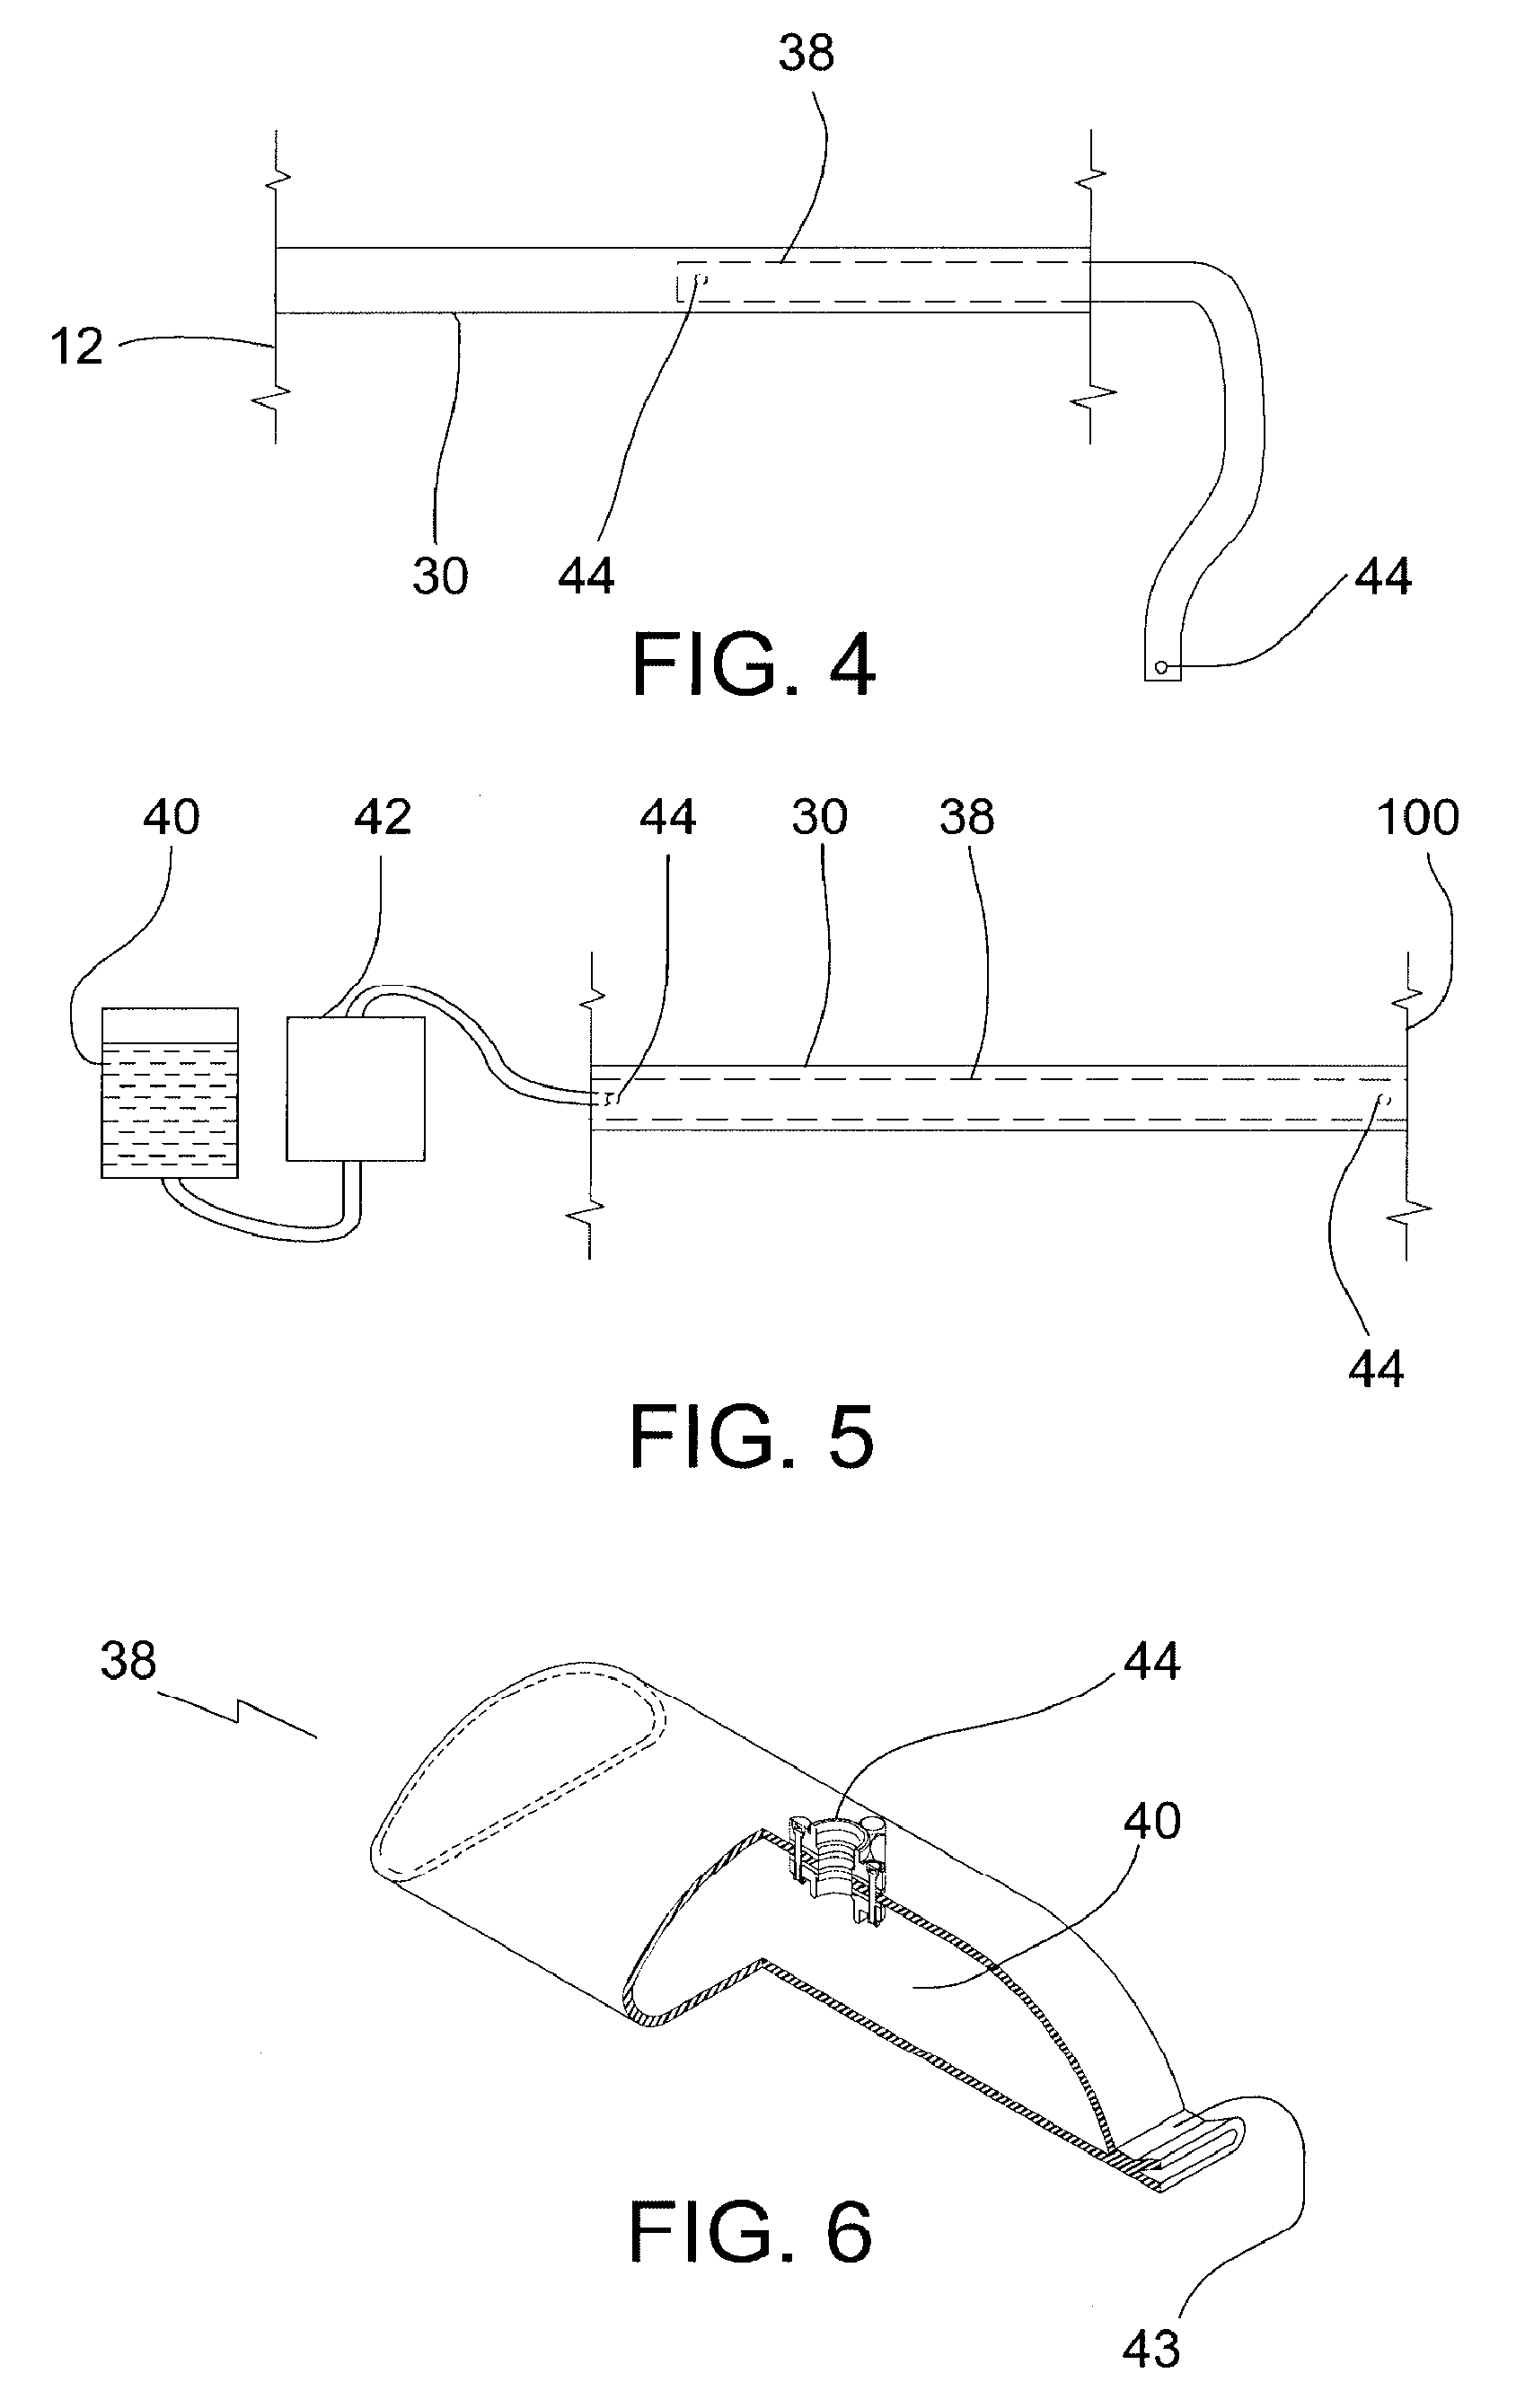 Method of securing elongated objects to a floating cover